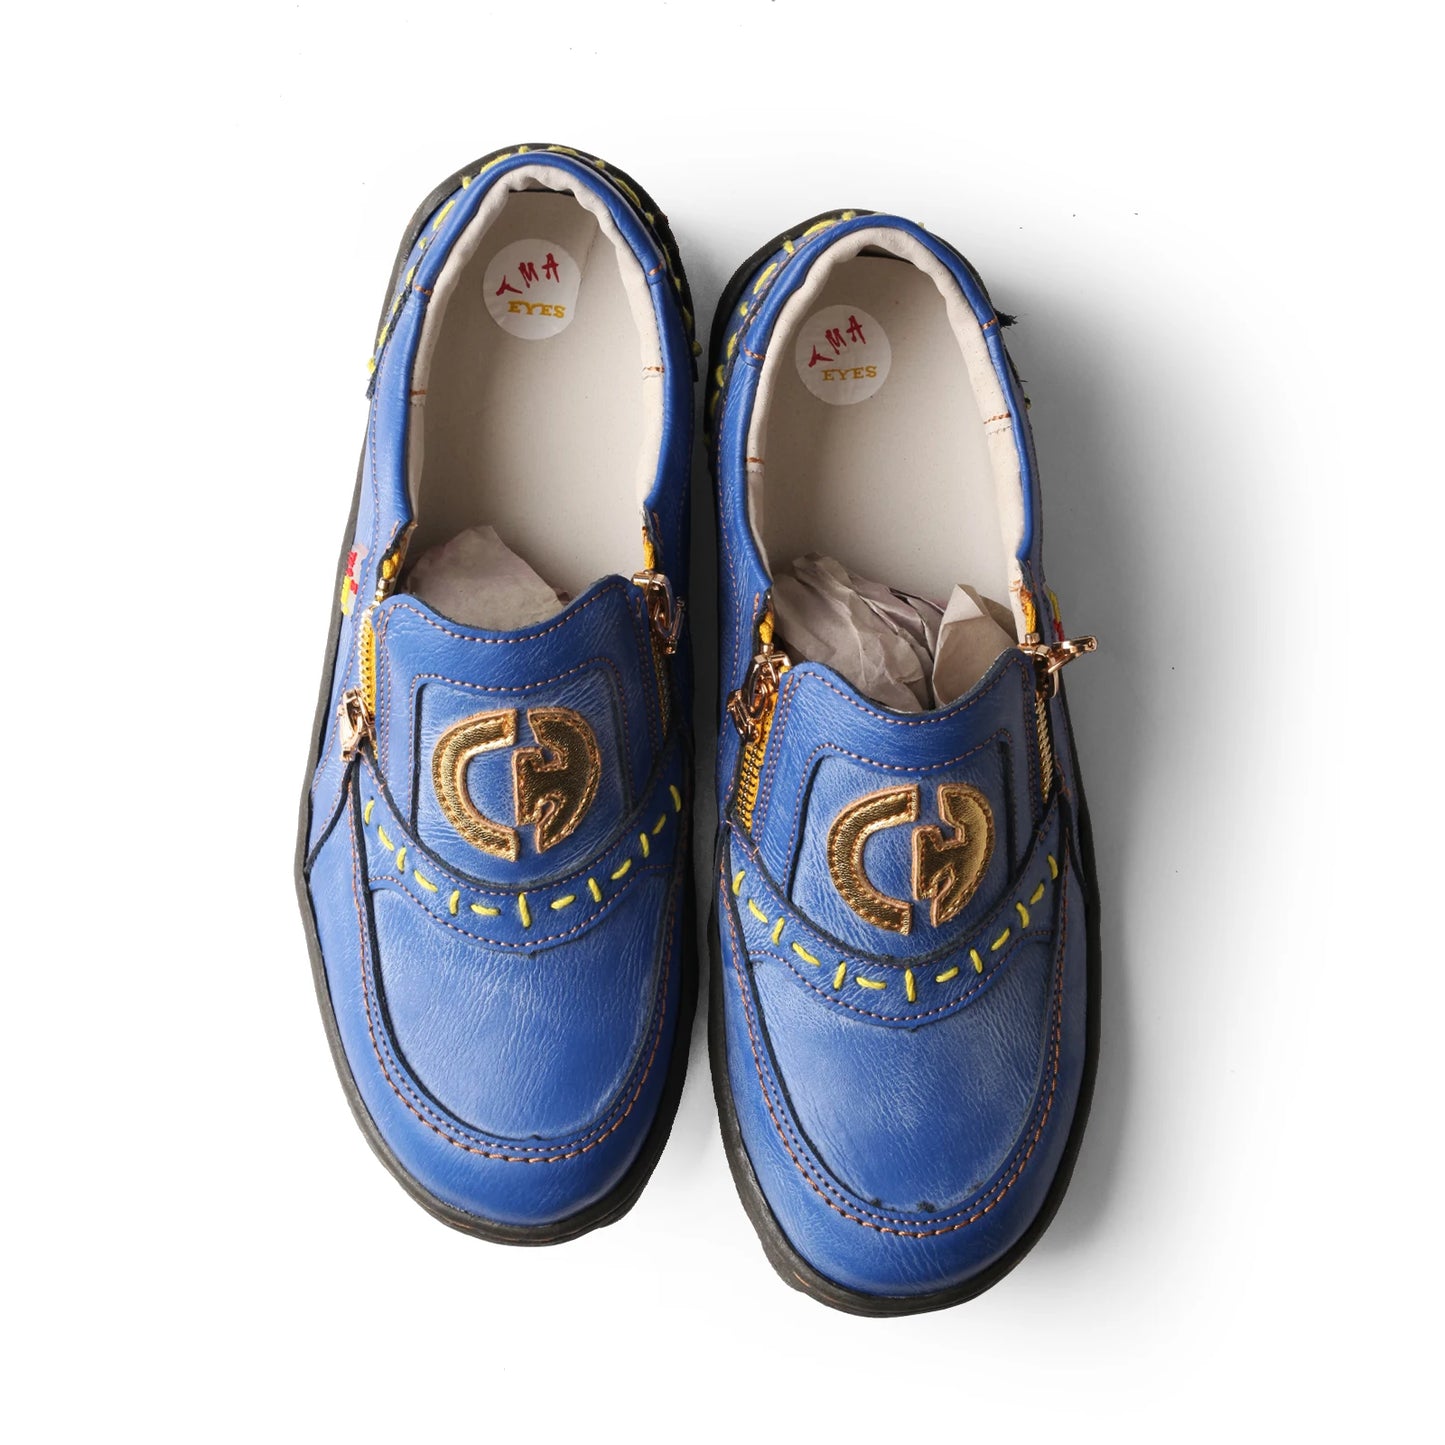 "Timeless Elegance: Classic Harmony Laceless Loafers for Sophisticated Comfort"